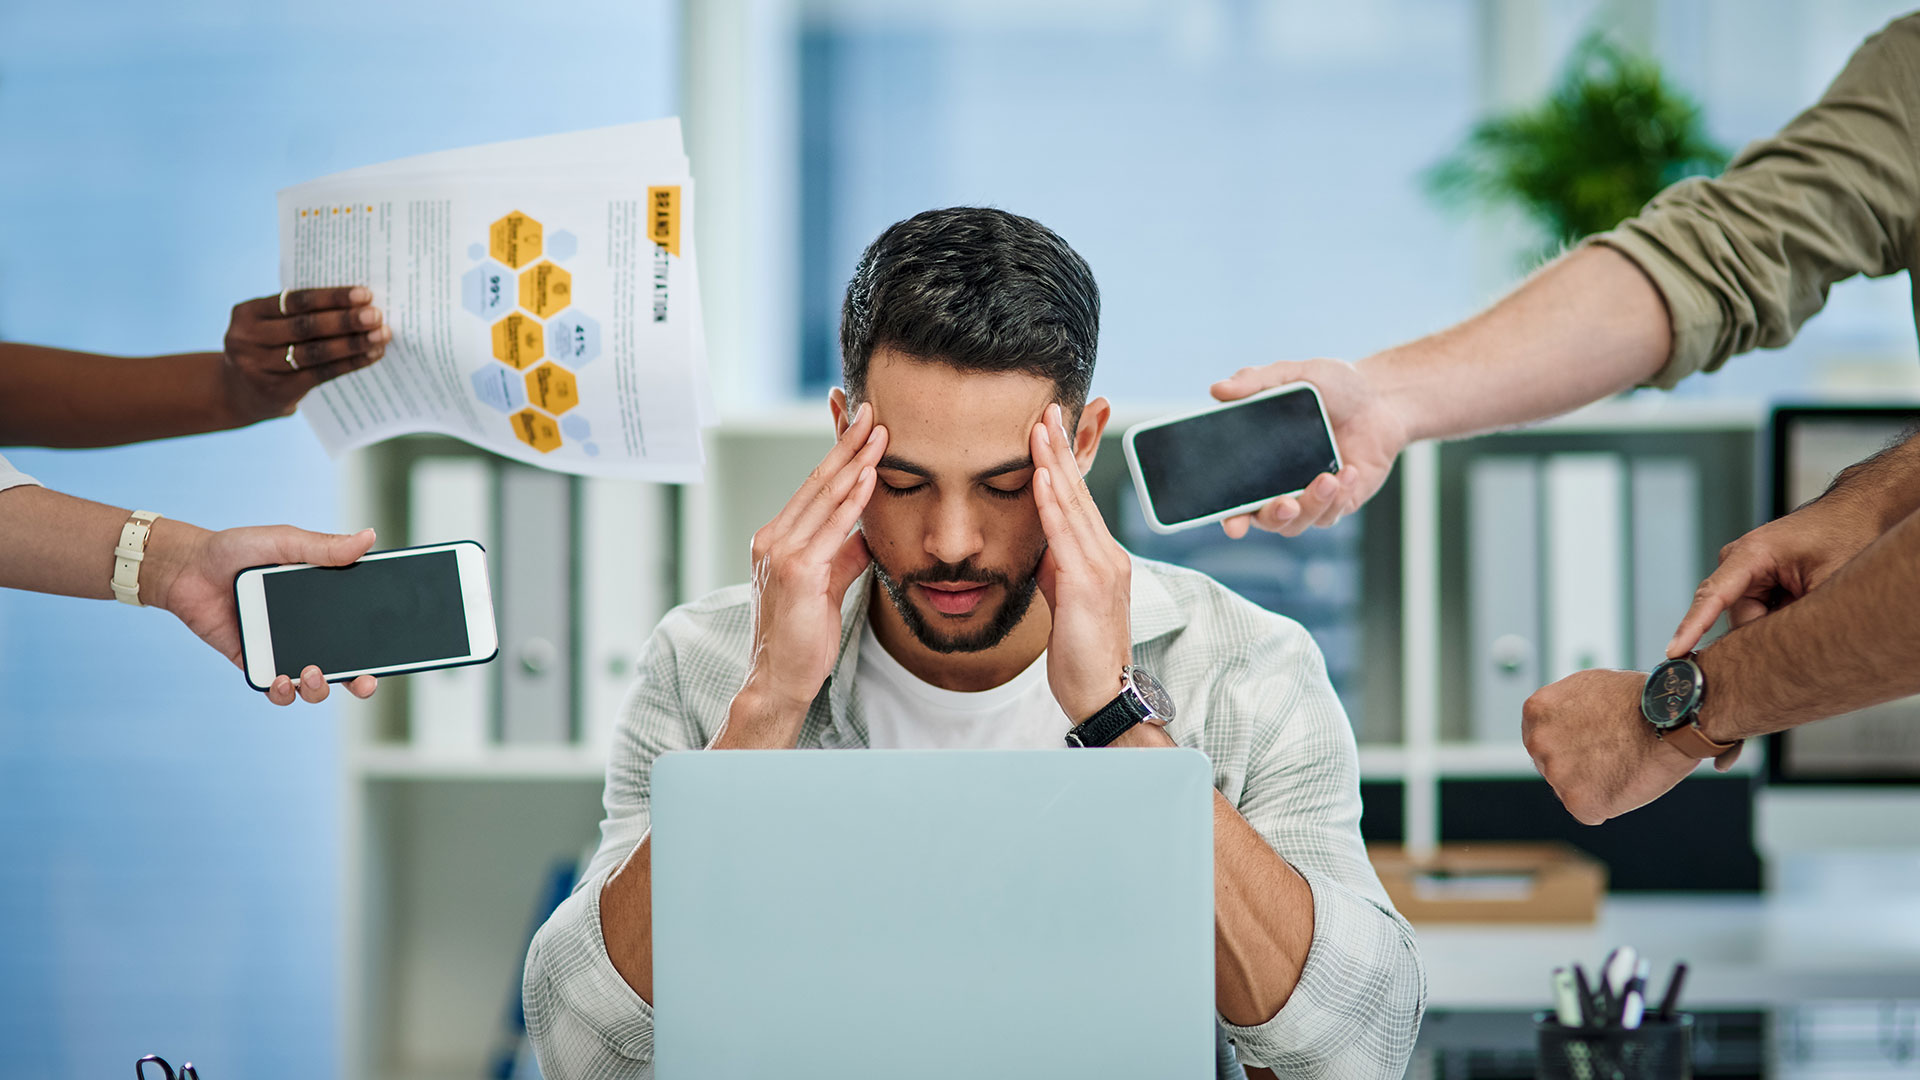 Burnout is a particular type of work-related stress, a state of physical or emotional exhaustion that also involves a lack of sense of accomplishment and loss of personal identity (Getty Images)